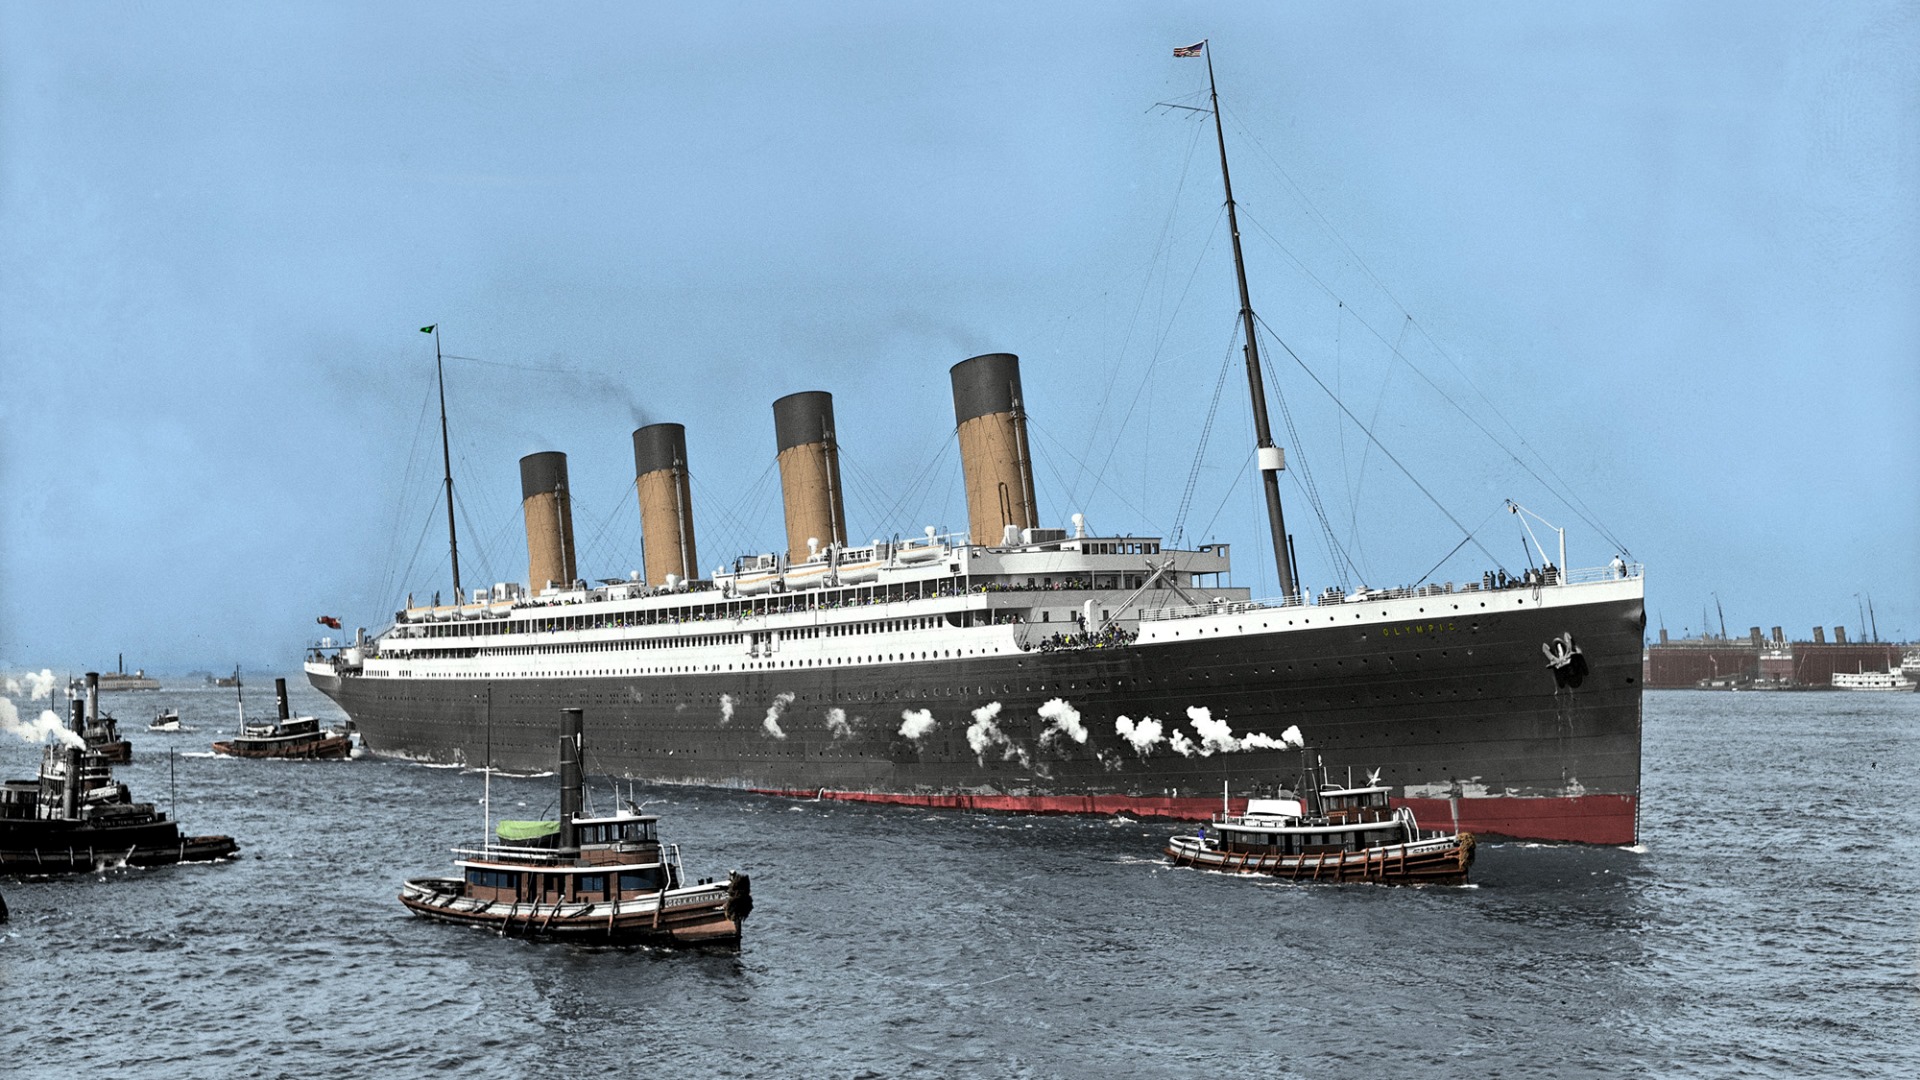 Vehicles RMS Olympic HD Wallpaper | Background Image